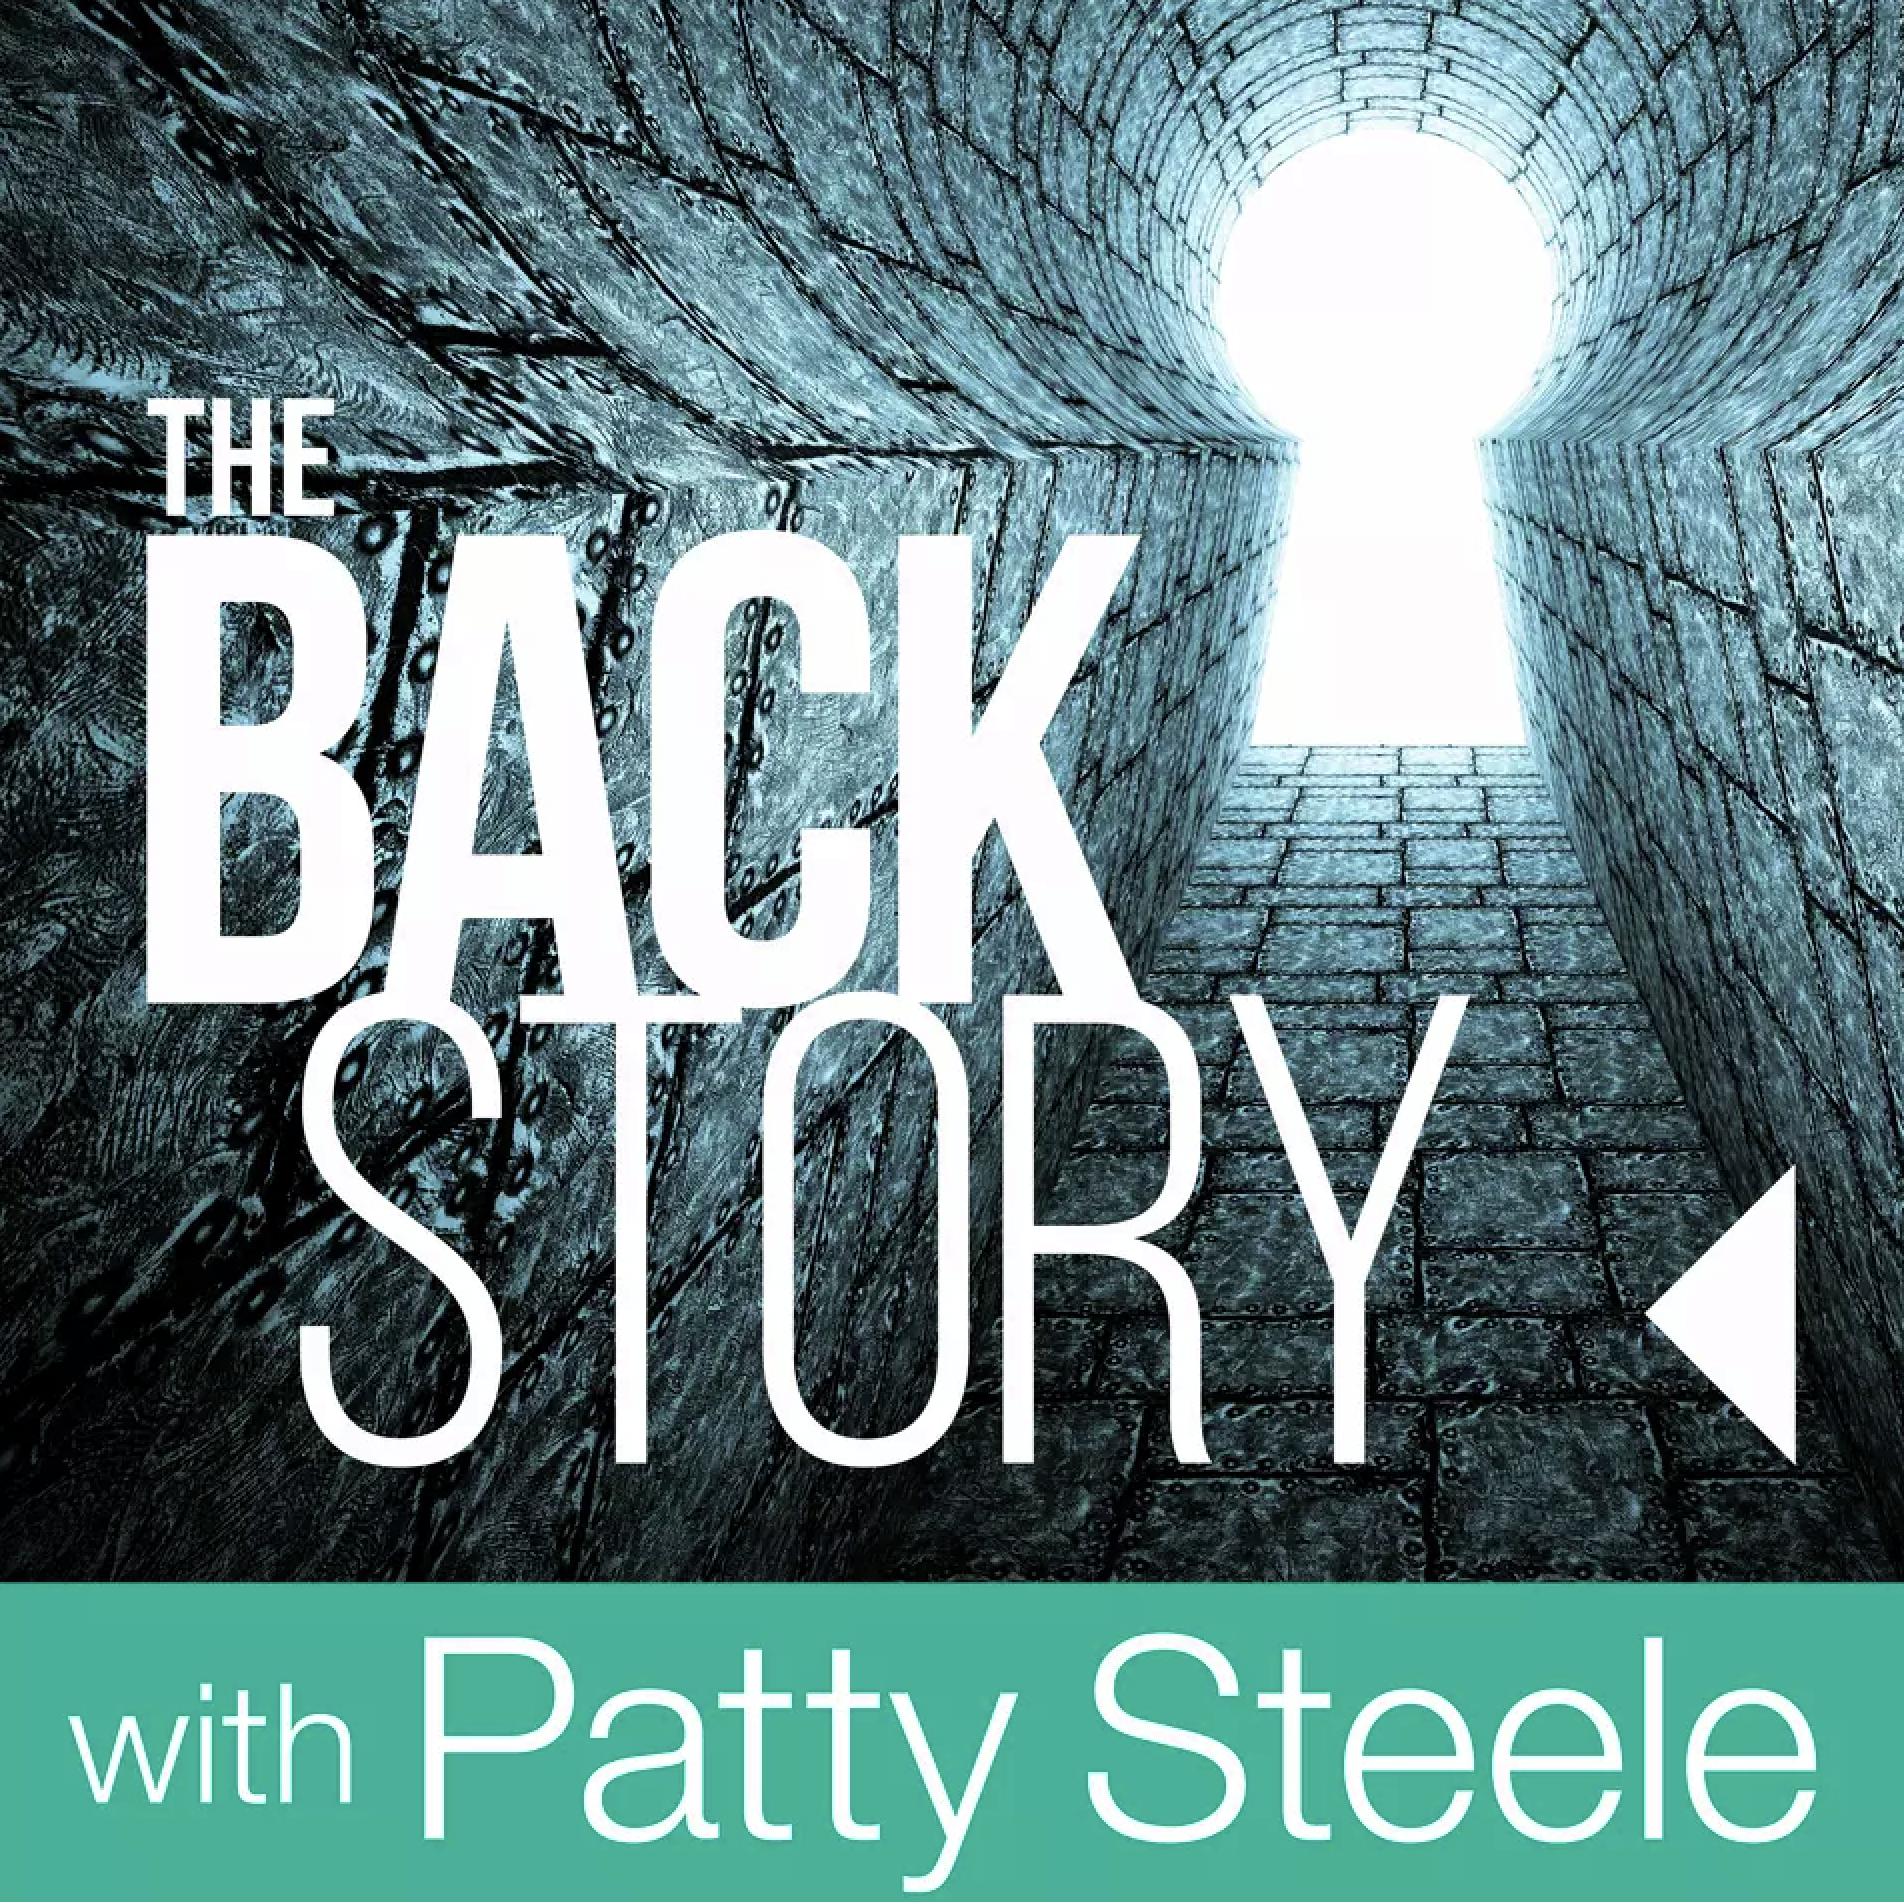 The Backstory: Meeting your children…from a past life